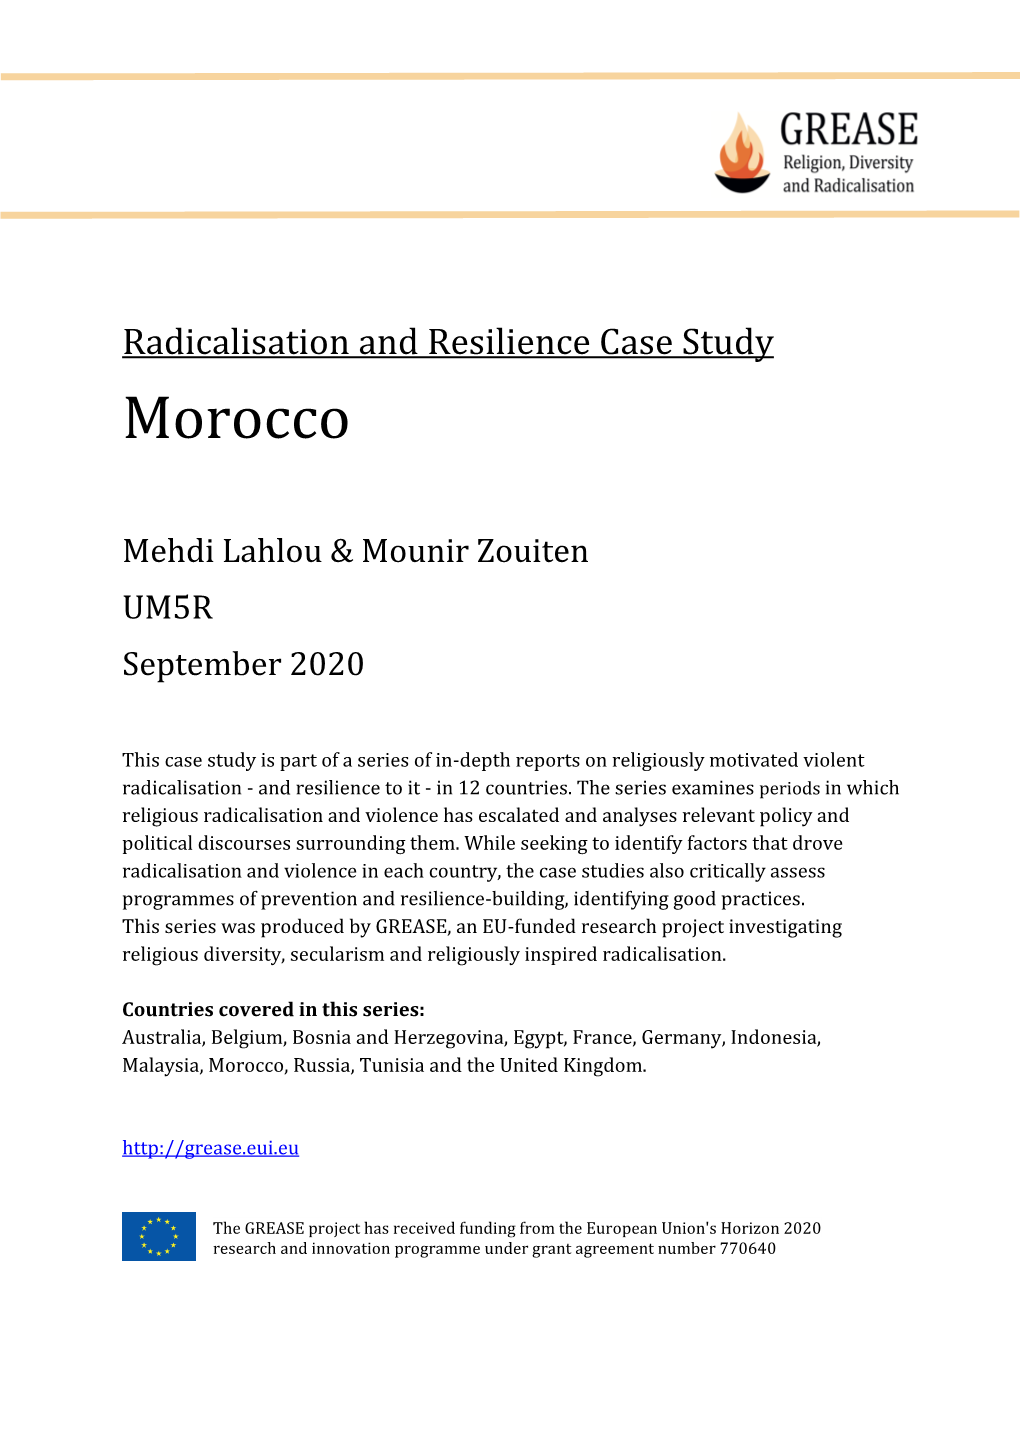 Radicalisation and Resilience Case Study: Morocco